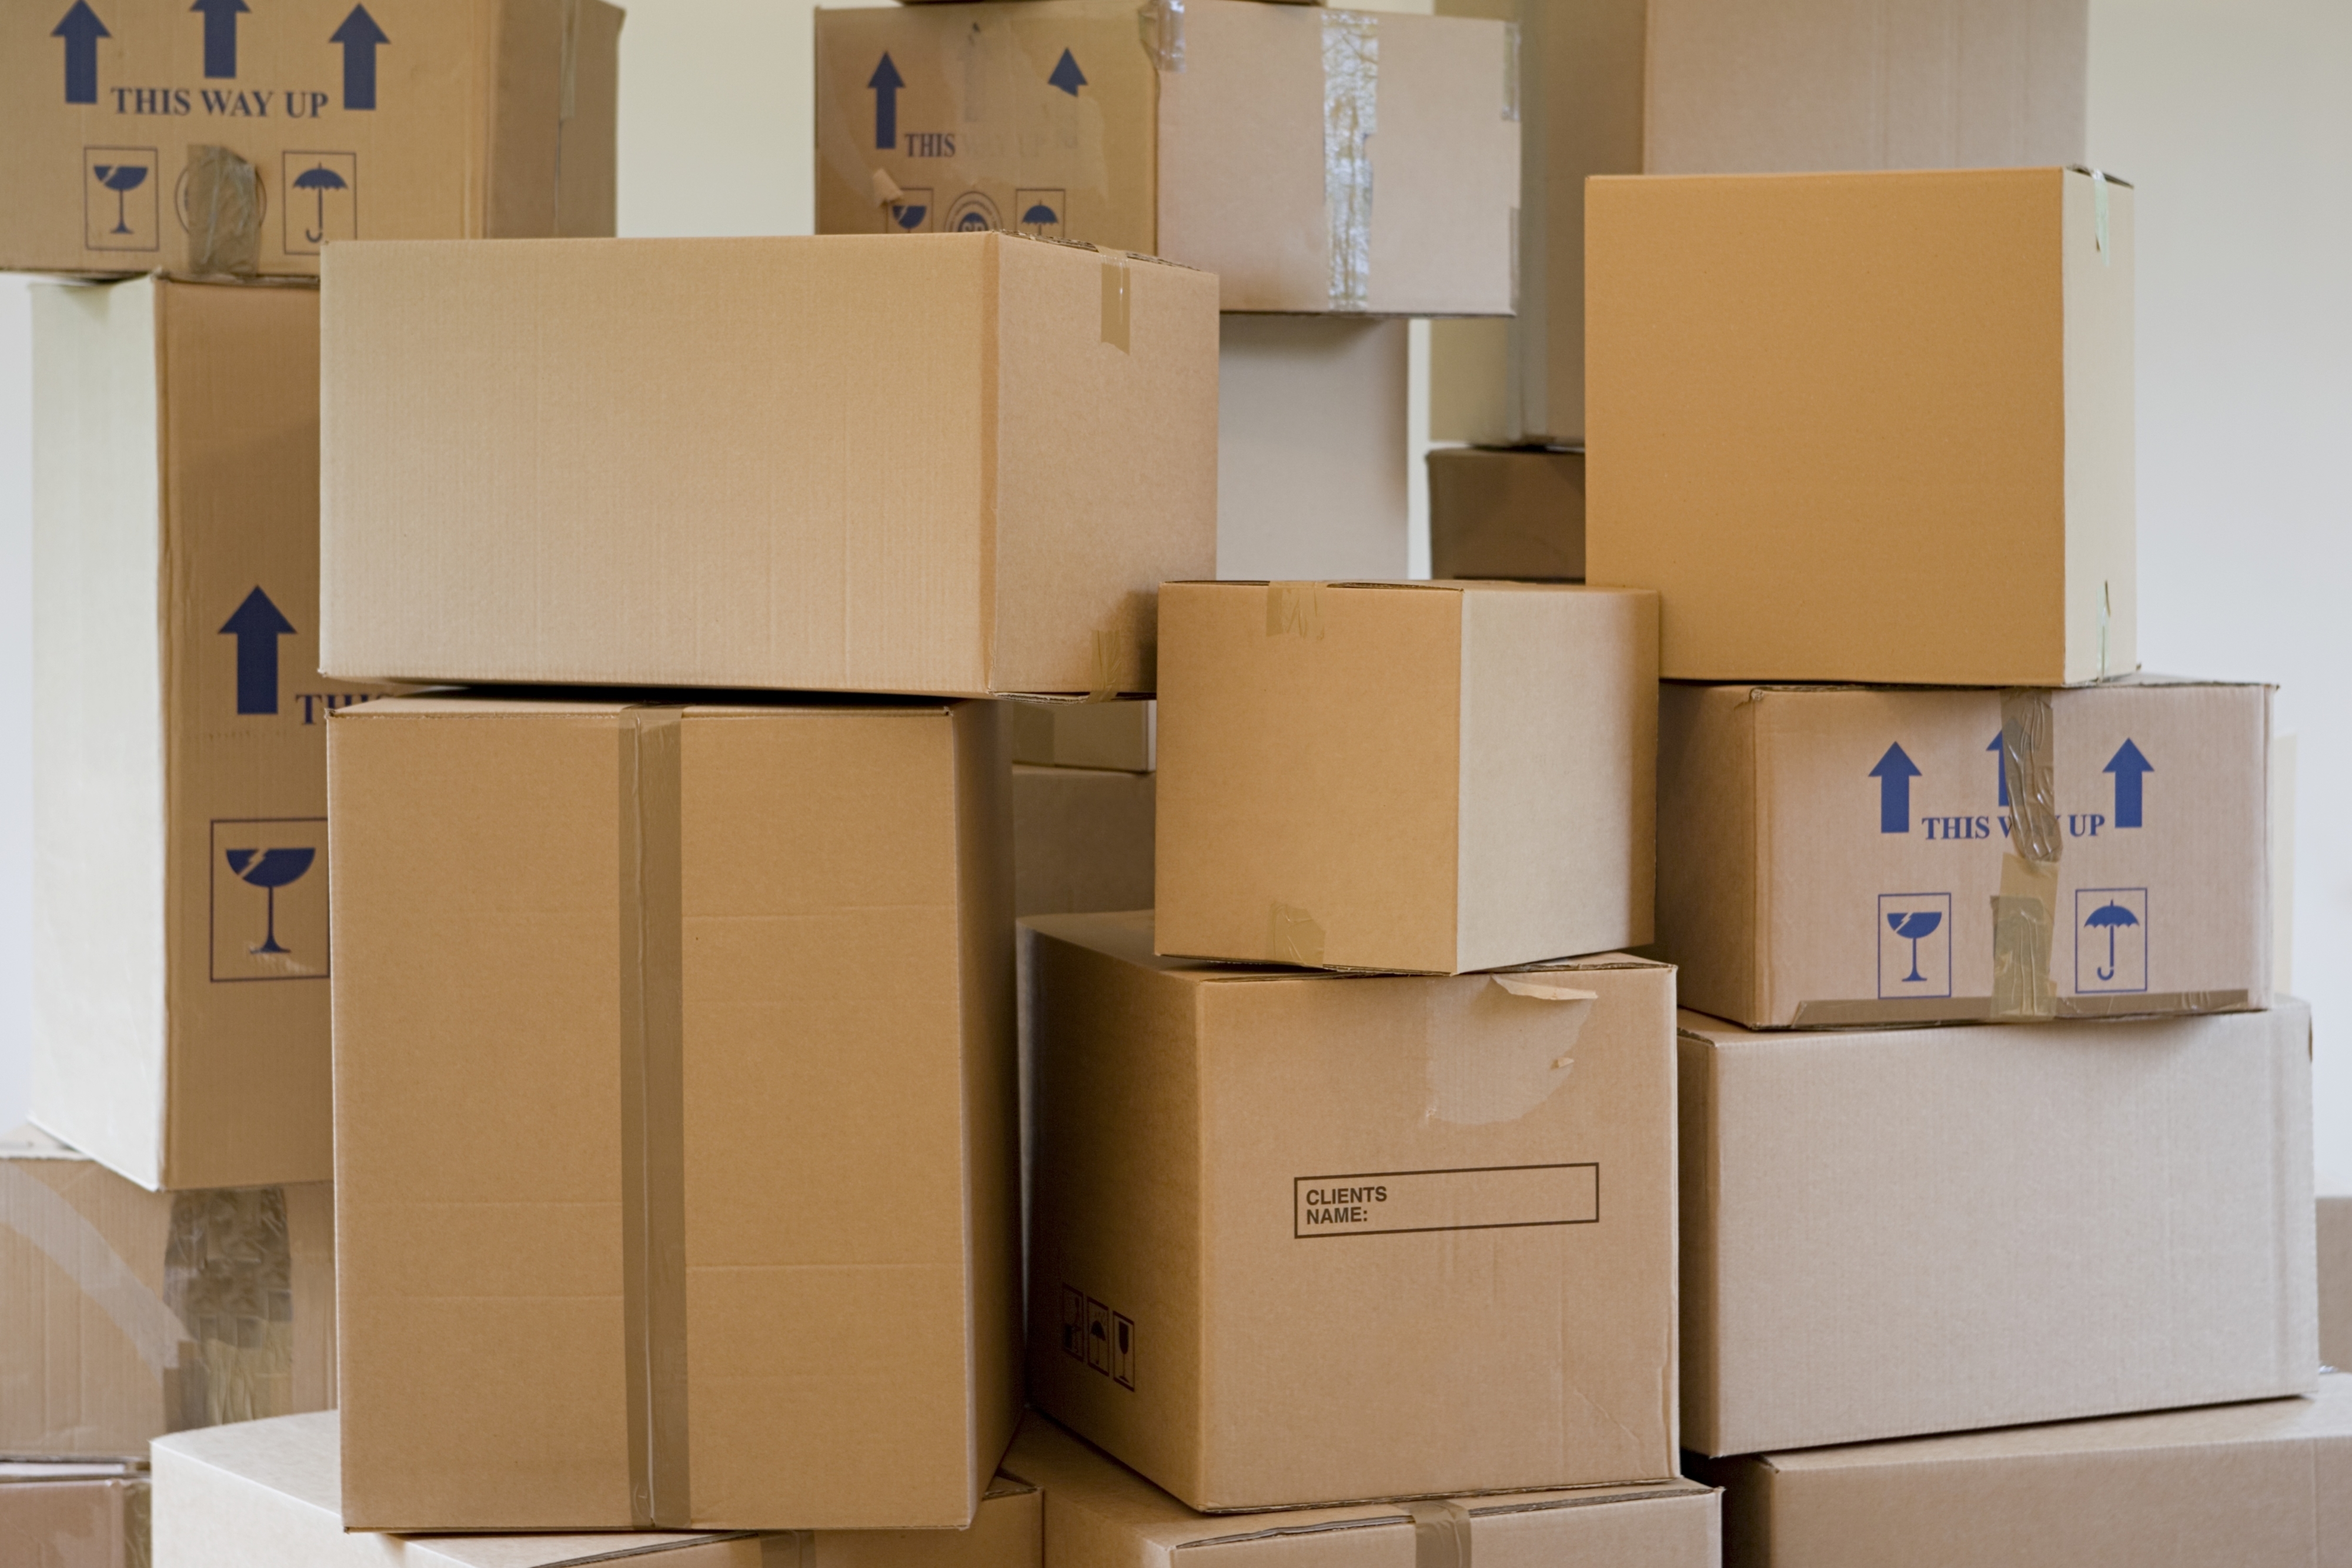 Stacked cardboard moving boxes in various sizes, some labeled with &quot;This way up&quot; and fragile symbols